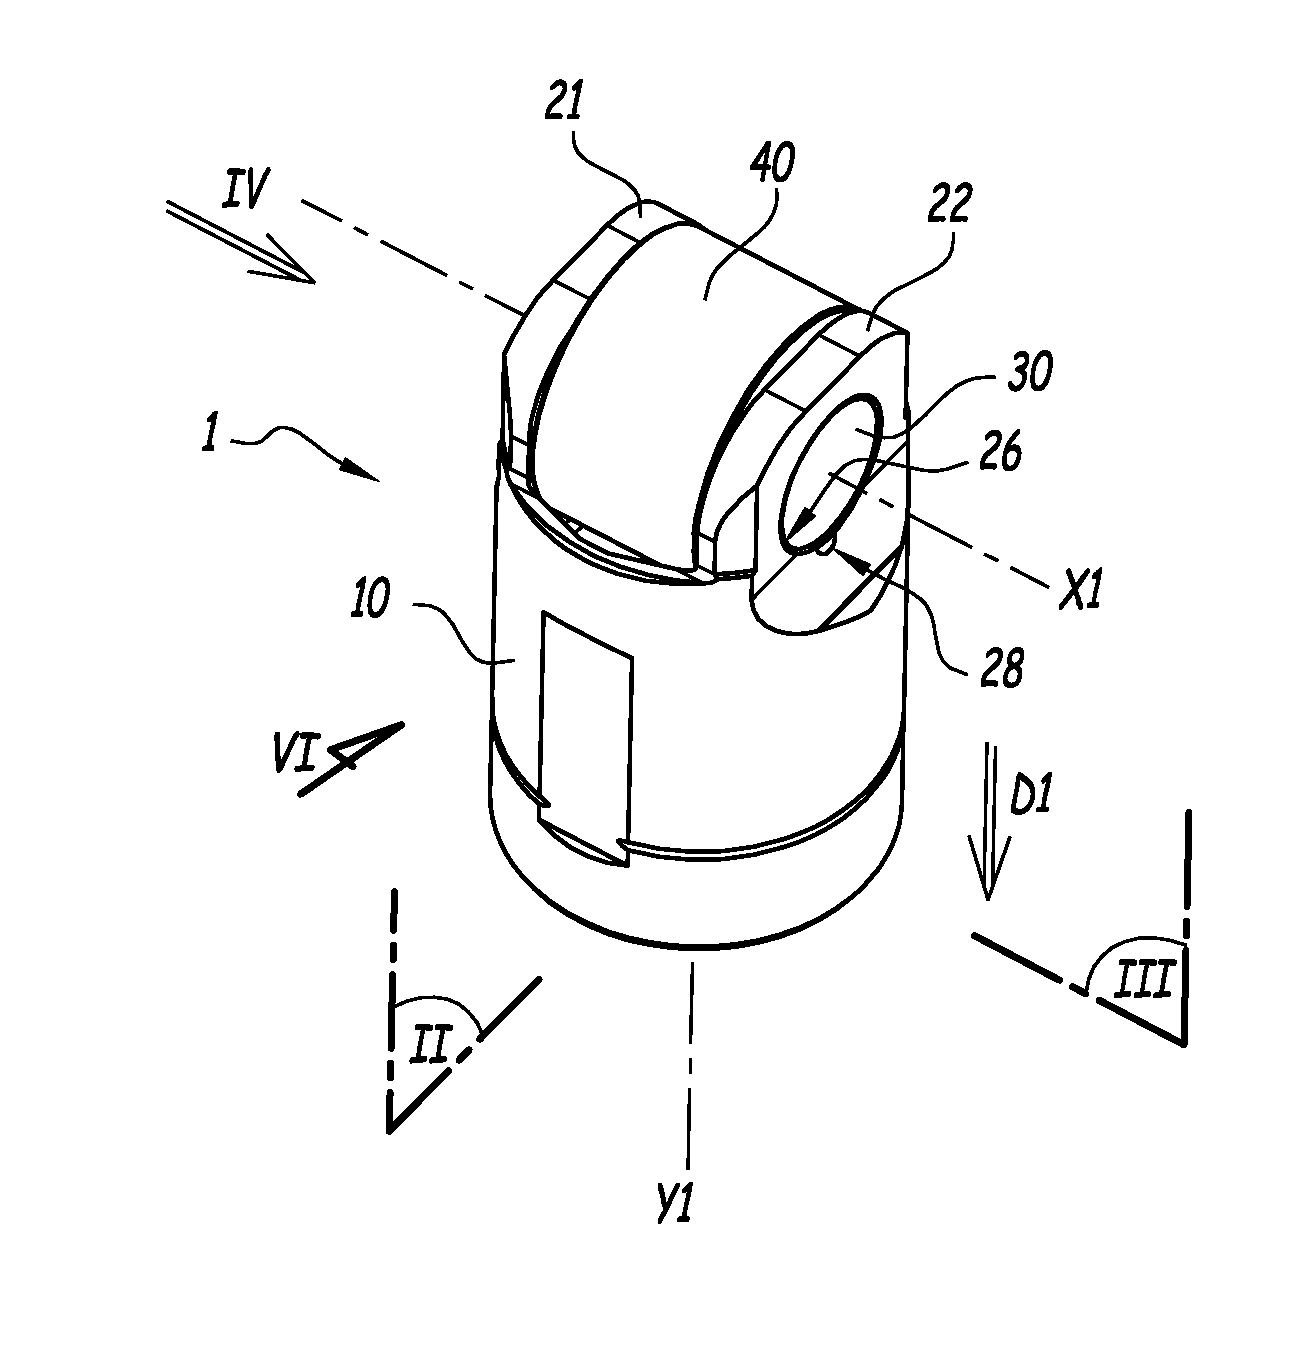 Method for manufacturing a roller, adapted to equip a mechanical system forming a cam follower or a rocker arm